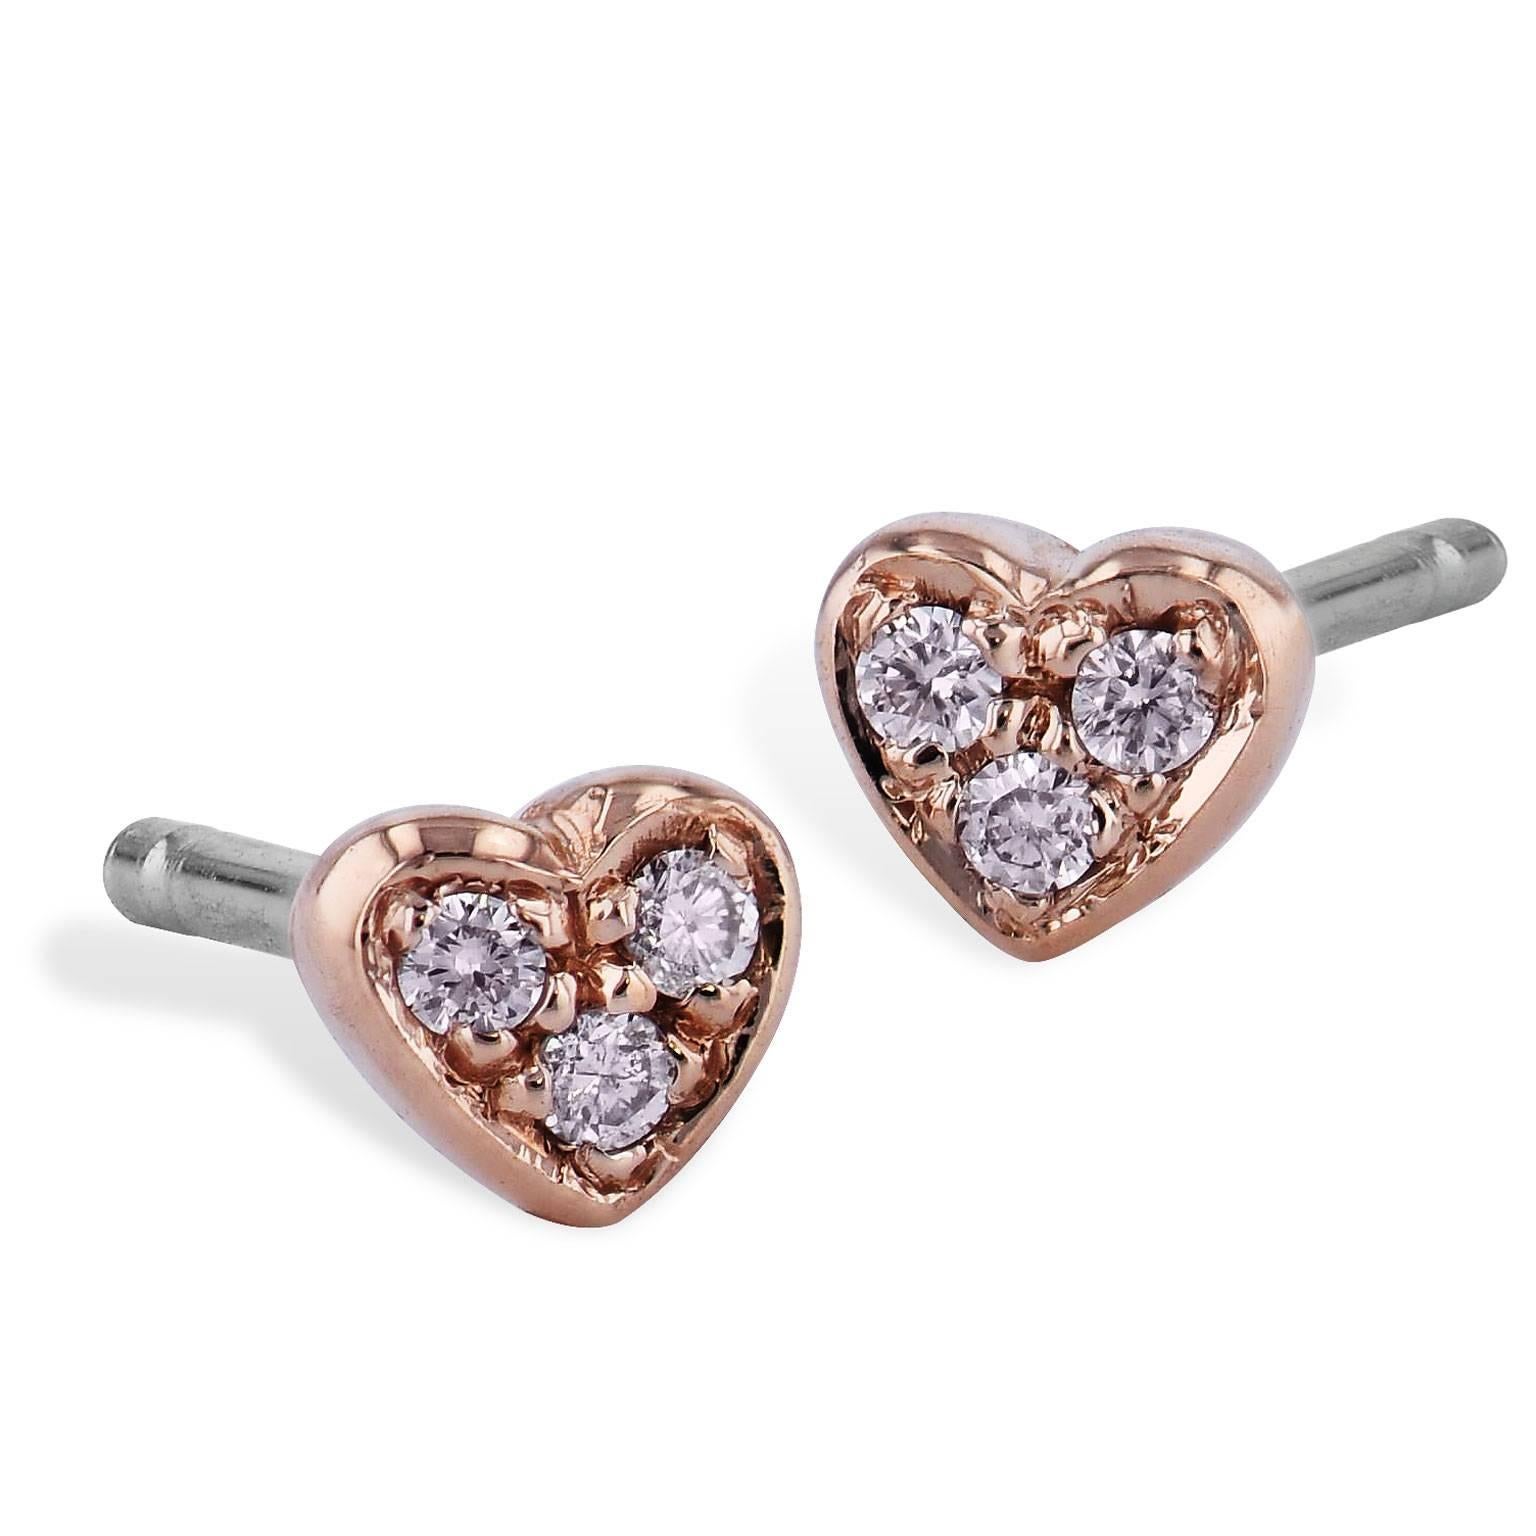 Simple and sweet, 0.05 carat of diamond (F/G/SI1/SI2) are pave-set in the shape of a heart in these handmade 14 karat rose gold baby stud earrings. Let a little bit of your love shine through with this pair of earrings